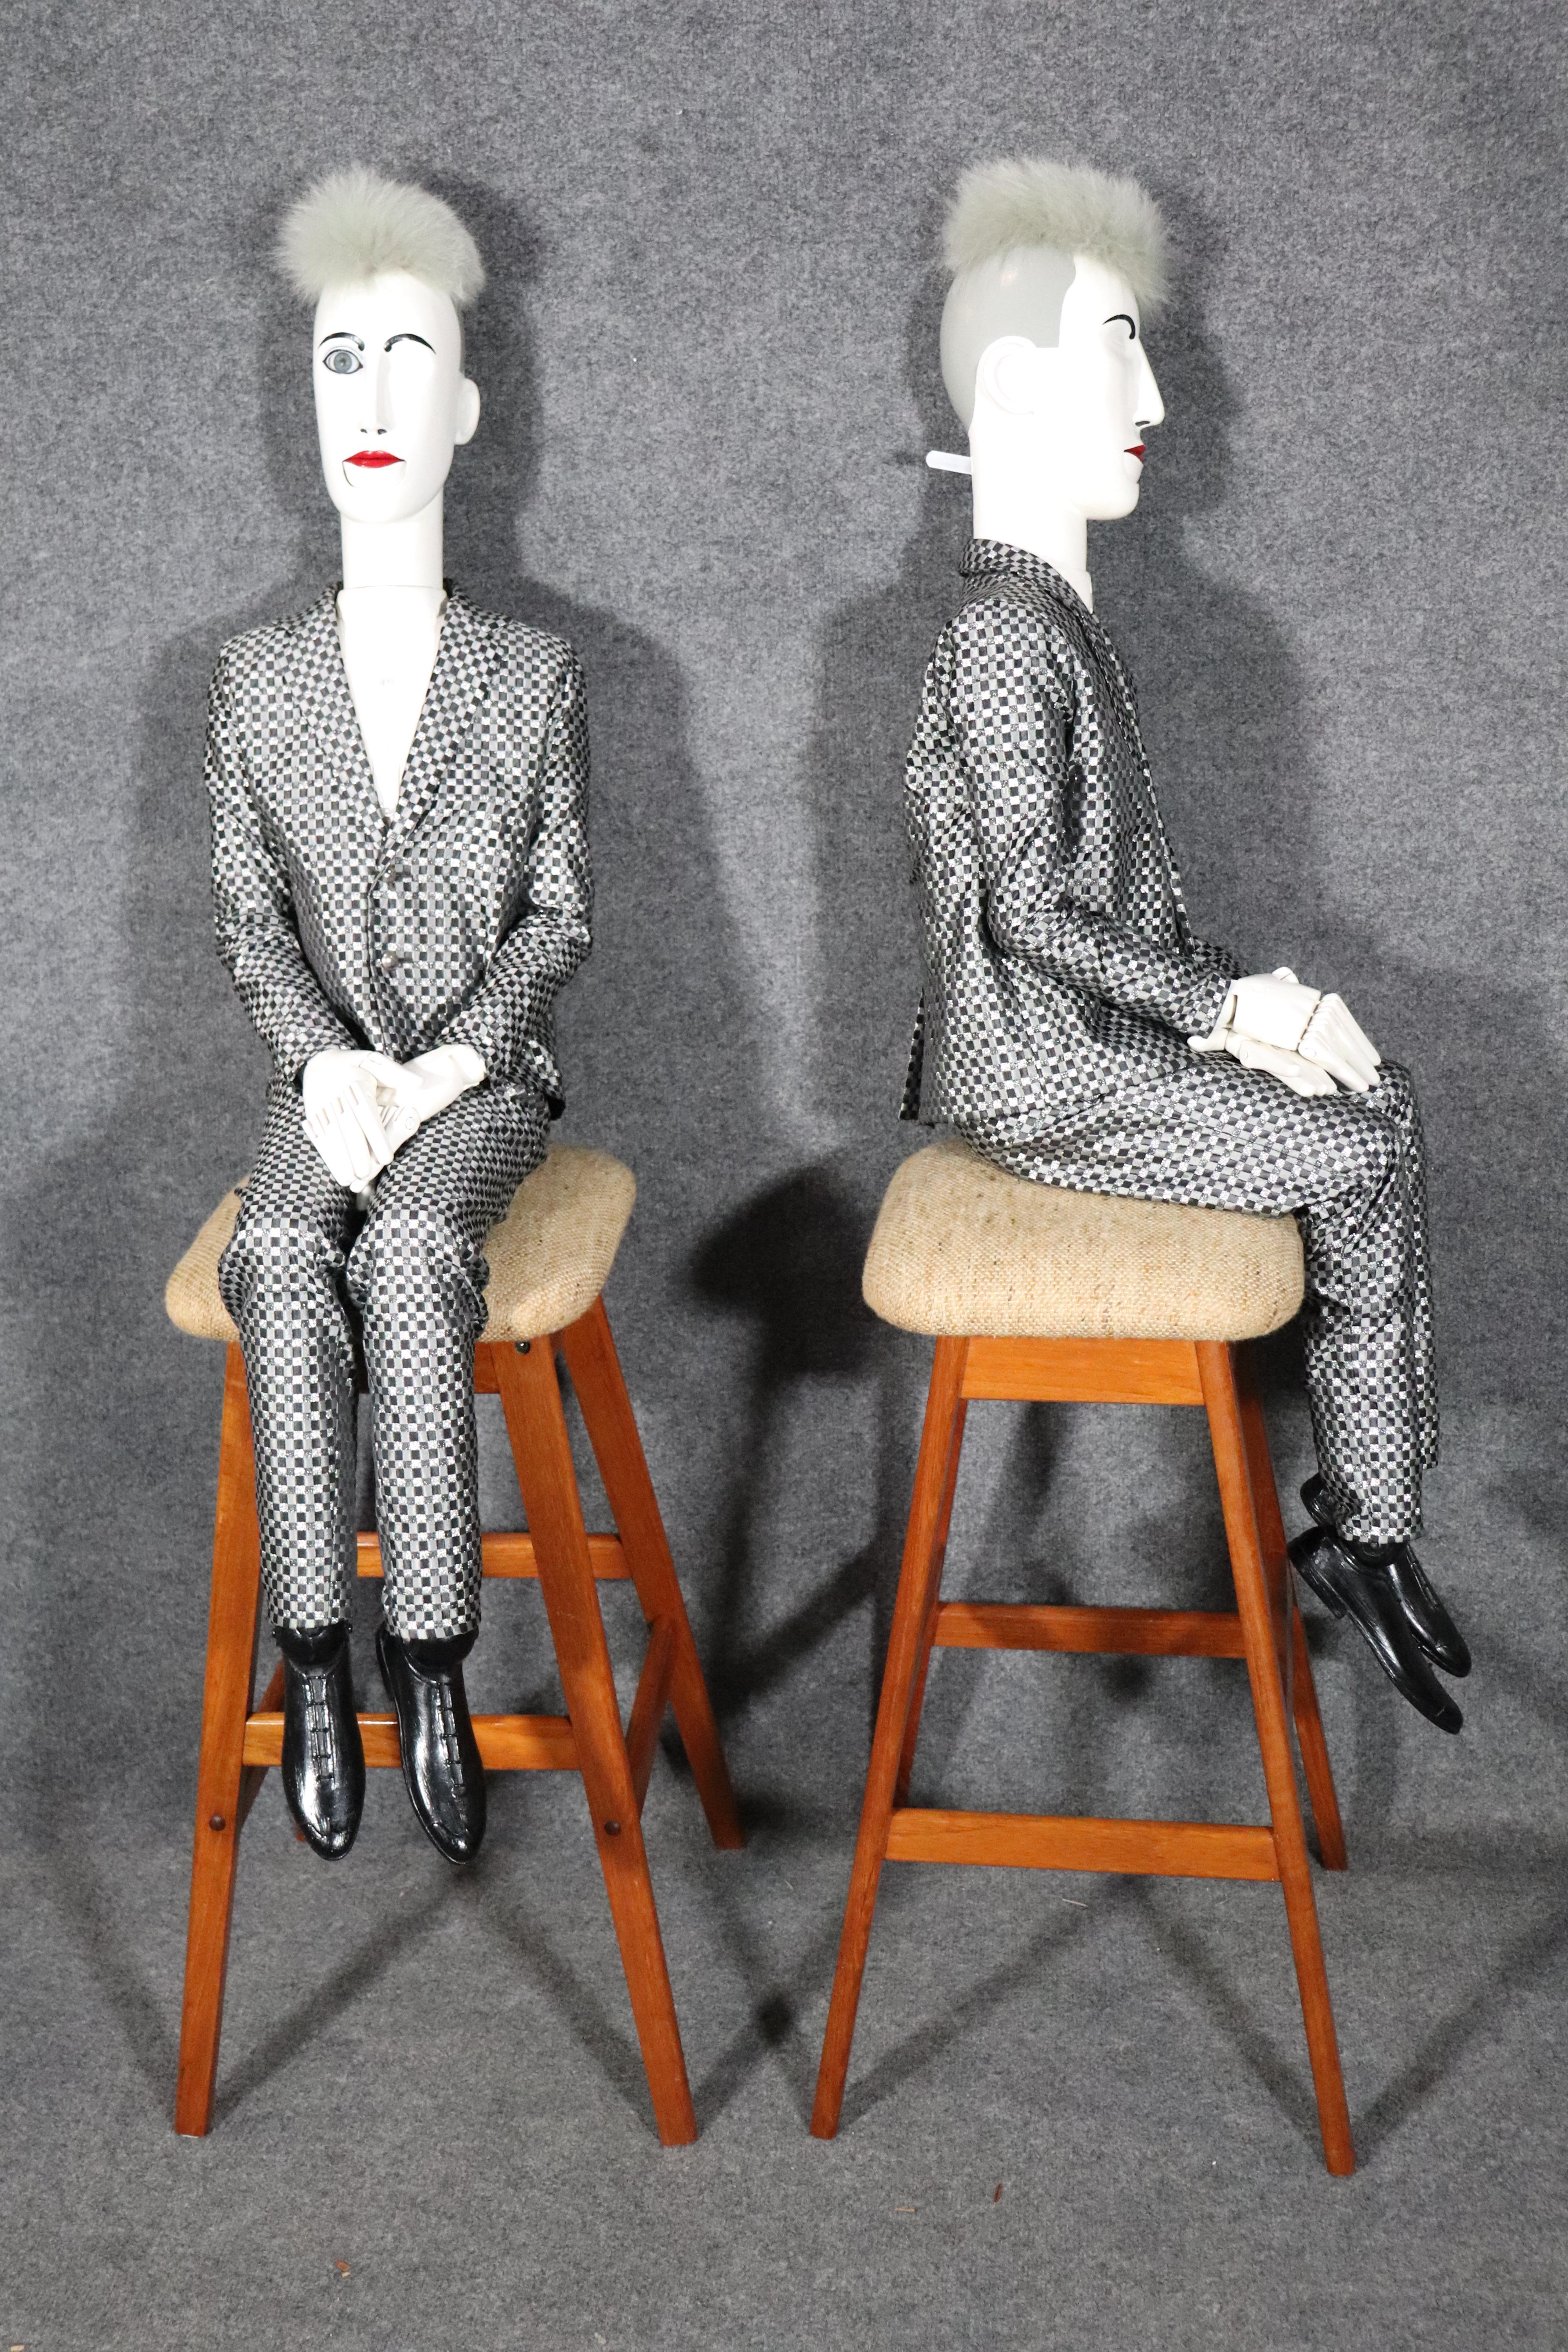 Dimensions- H: 45in W: 12in D: 8 1/2in
!!!CHAIRS NOT INCLUDED!!!
This MCM abstract pair of Ventriloquists Titled 